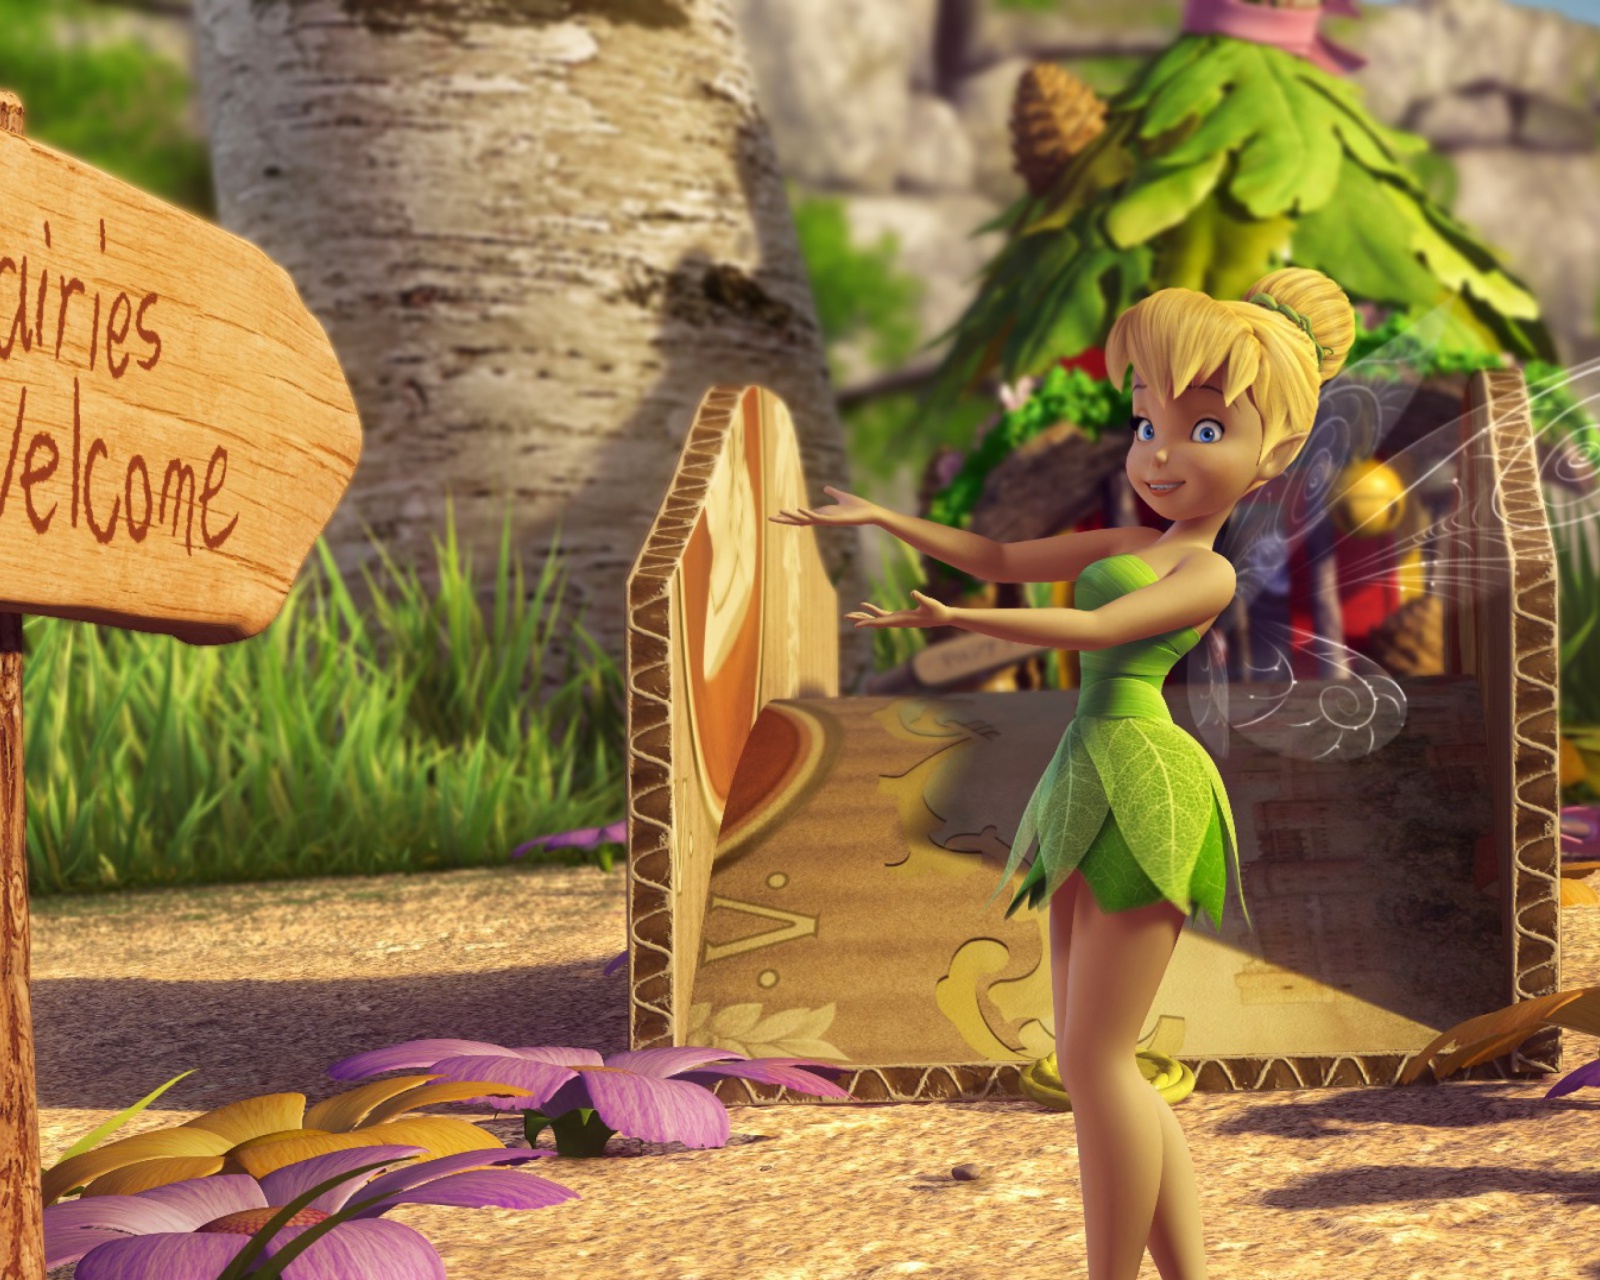 Das Tinker Bell And The Great Fairy Rescue 2 Wallpaper 1600x1280